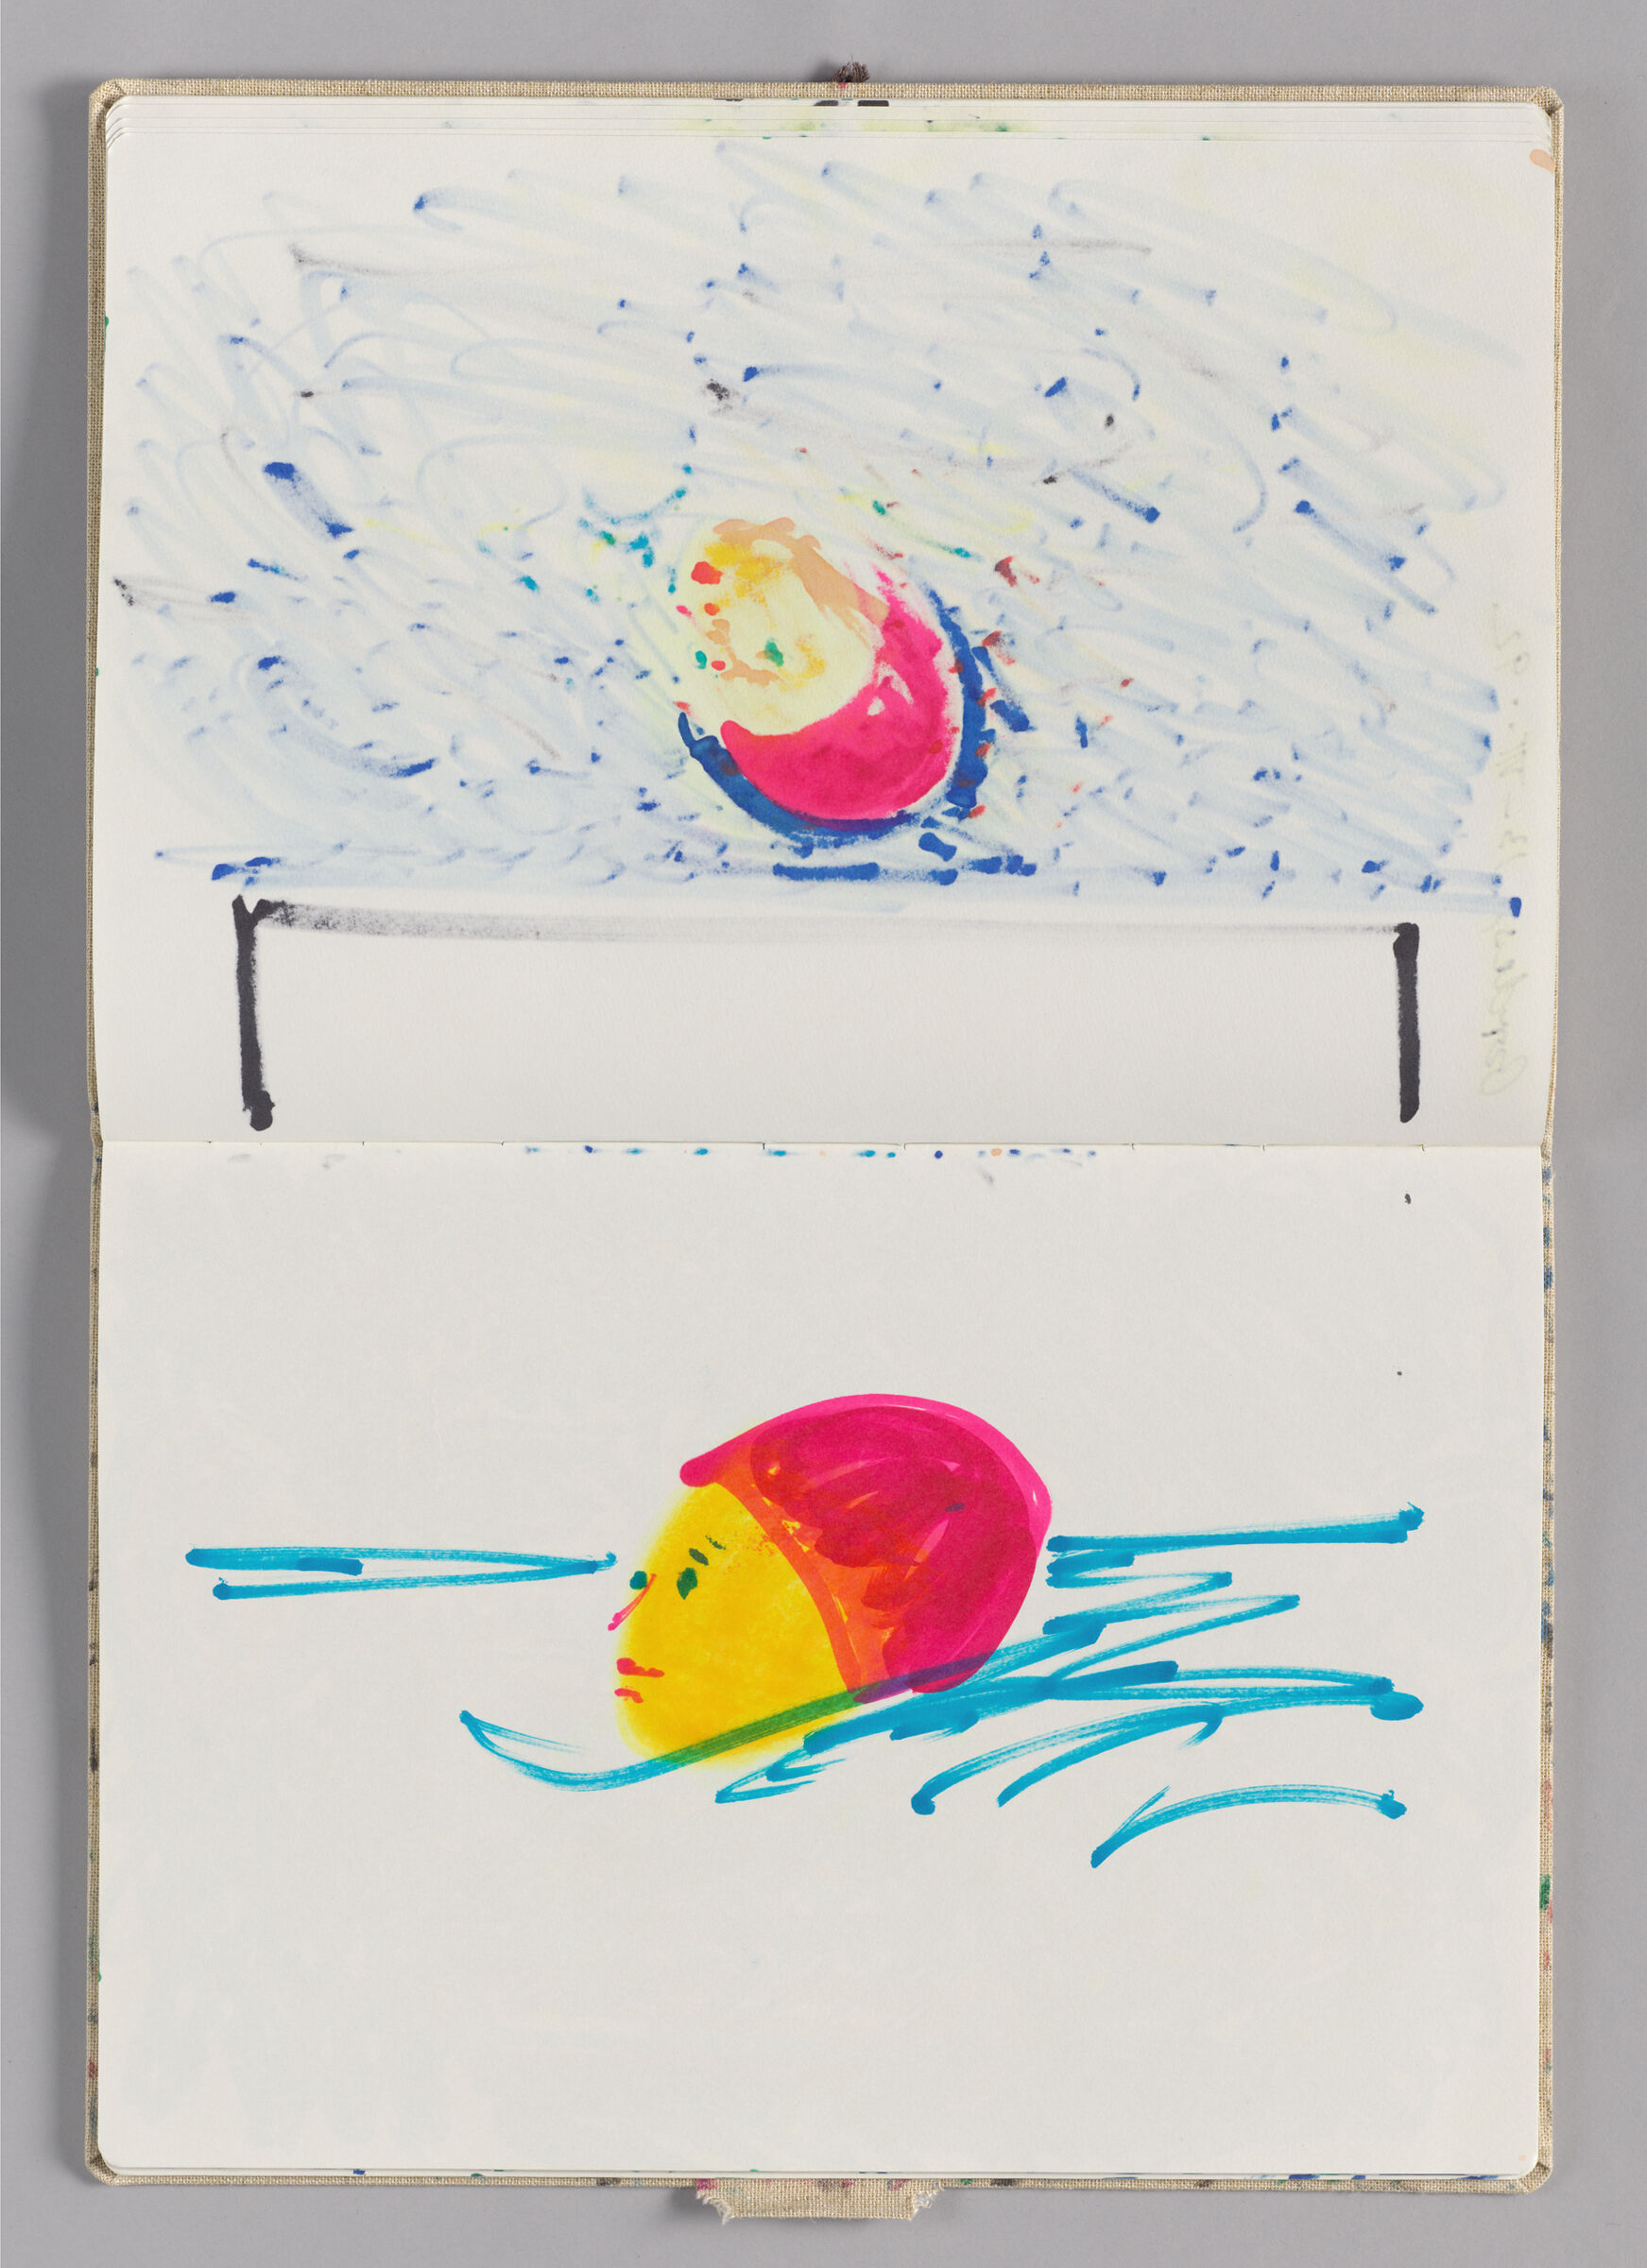 Untitled (Bleed-Through Of Previous Page, Left Page); Untitled (Figure In Pool, Right Page)